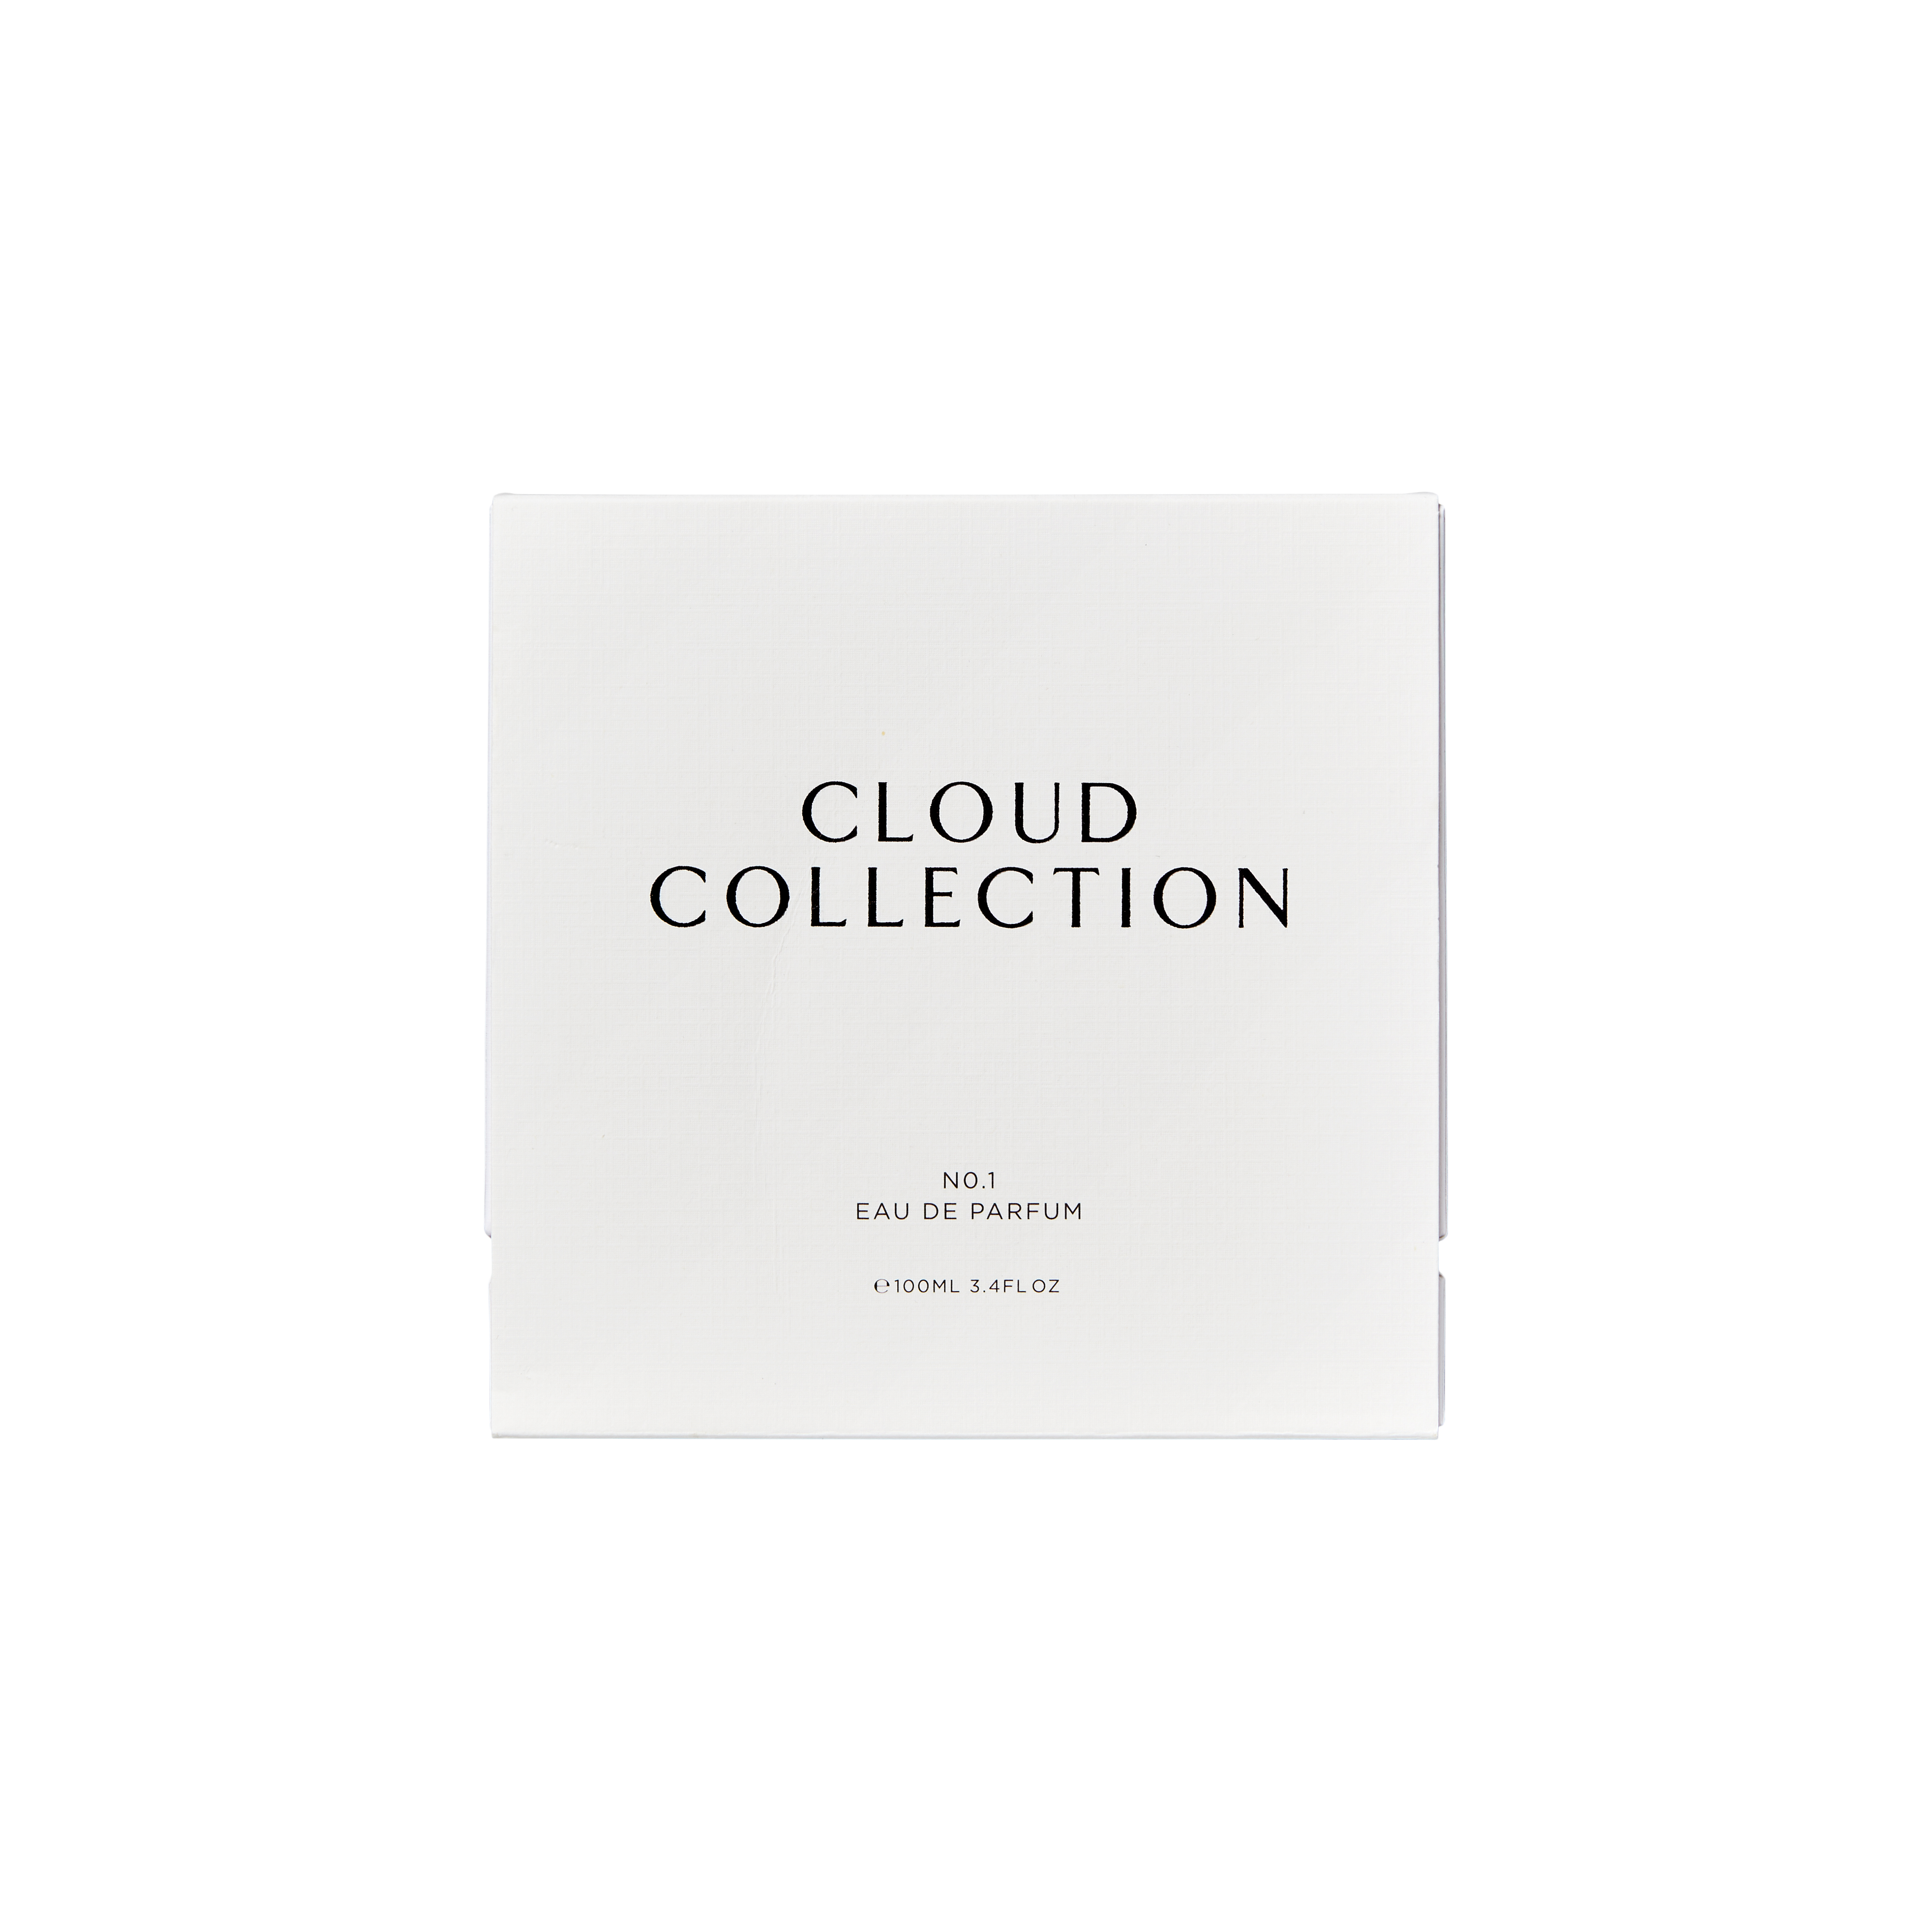 CLOUD COLLECTION No.1 100ml